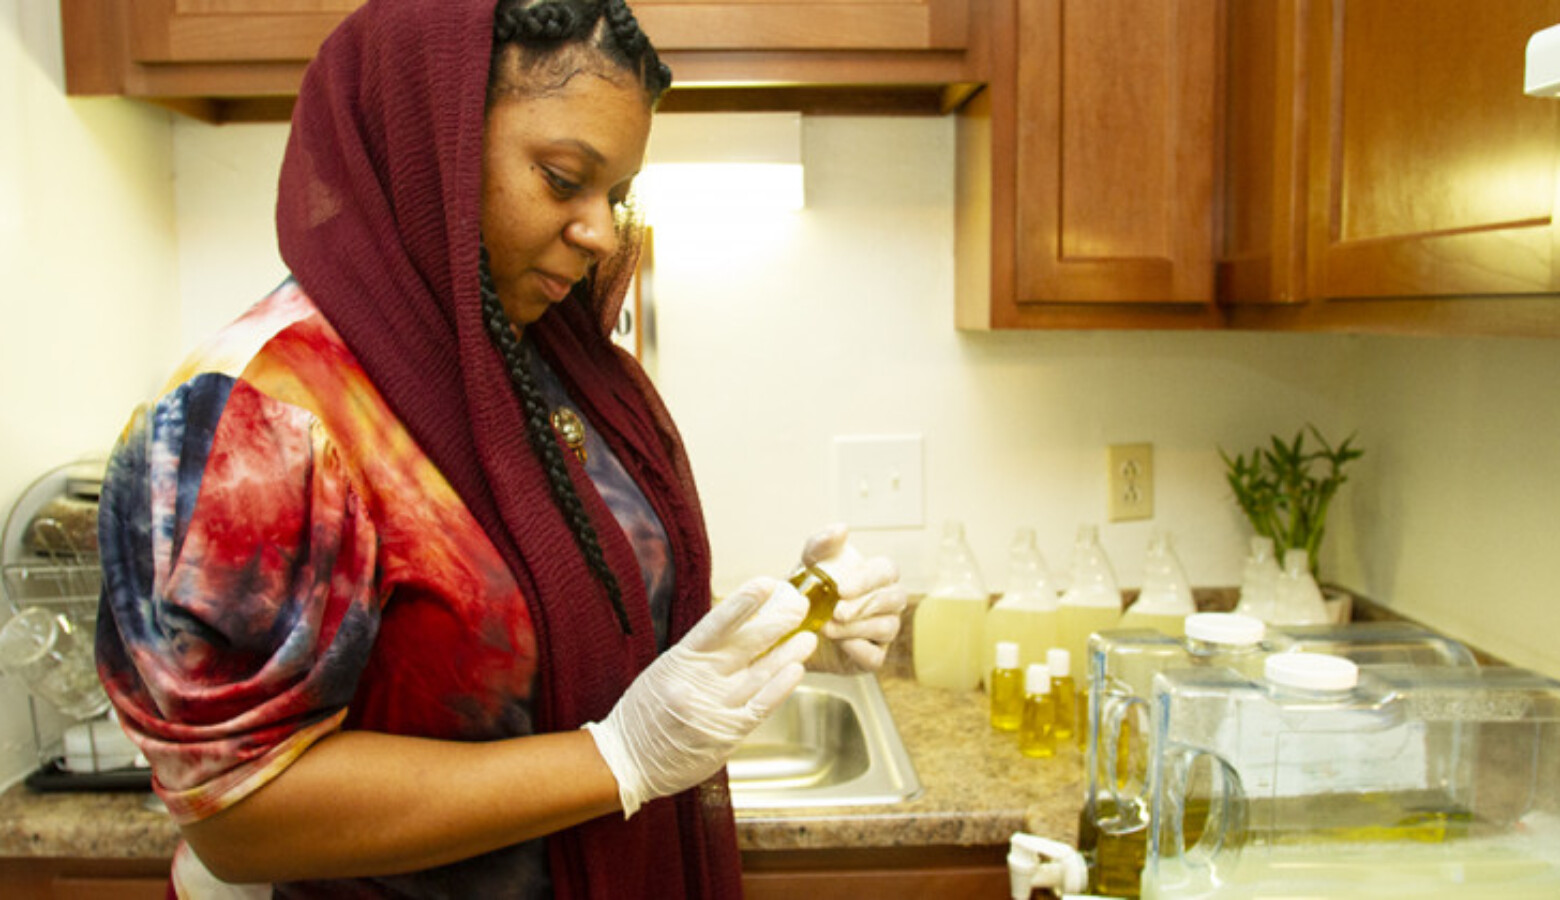 La'Kiyah Muhammad prepares her all-natural baby oil and multi-purpose spray in her kitchen. While Muhammad first started her business five years ago, she's refocusing her energy on its growth during the pandemic.